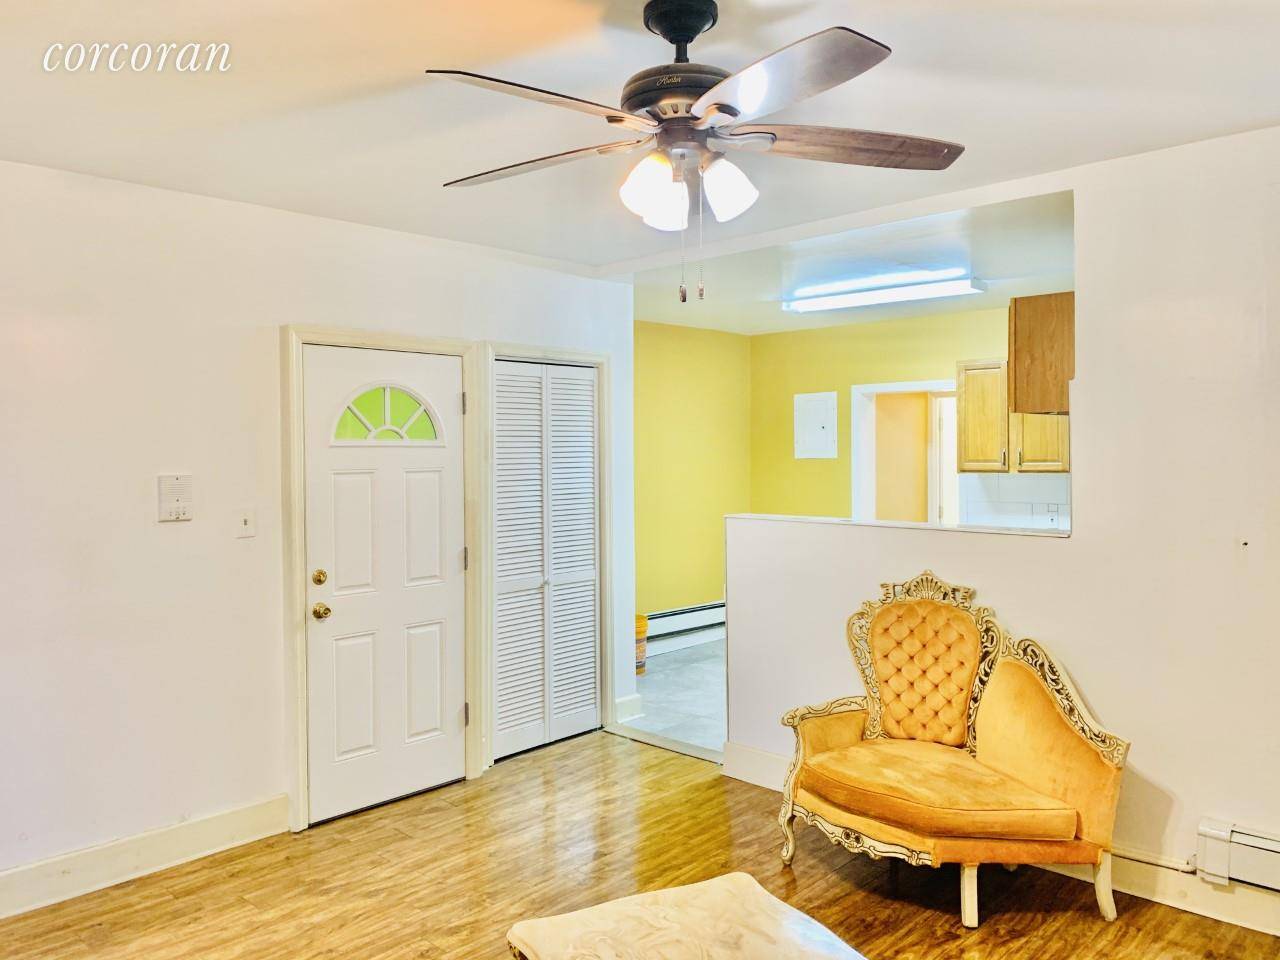 Rental for residential or commercial office use Large unit with plenty of closets and windows Available March 1st Newly updated unit with 4 Bedrooms 1 bath Two bedrooms can fit ...